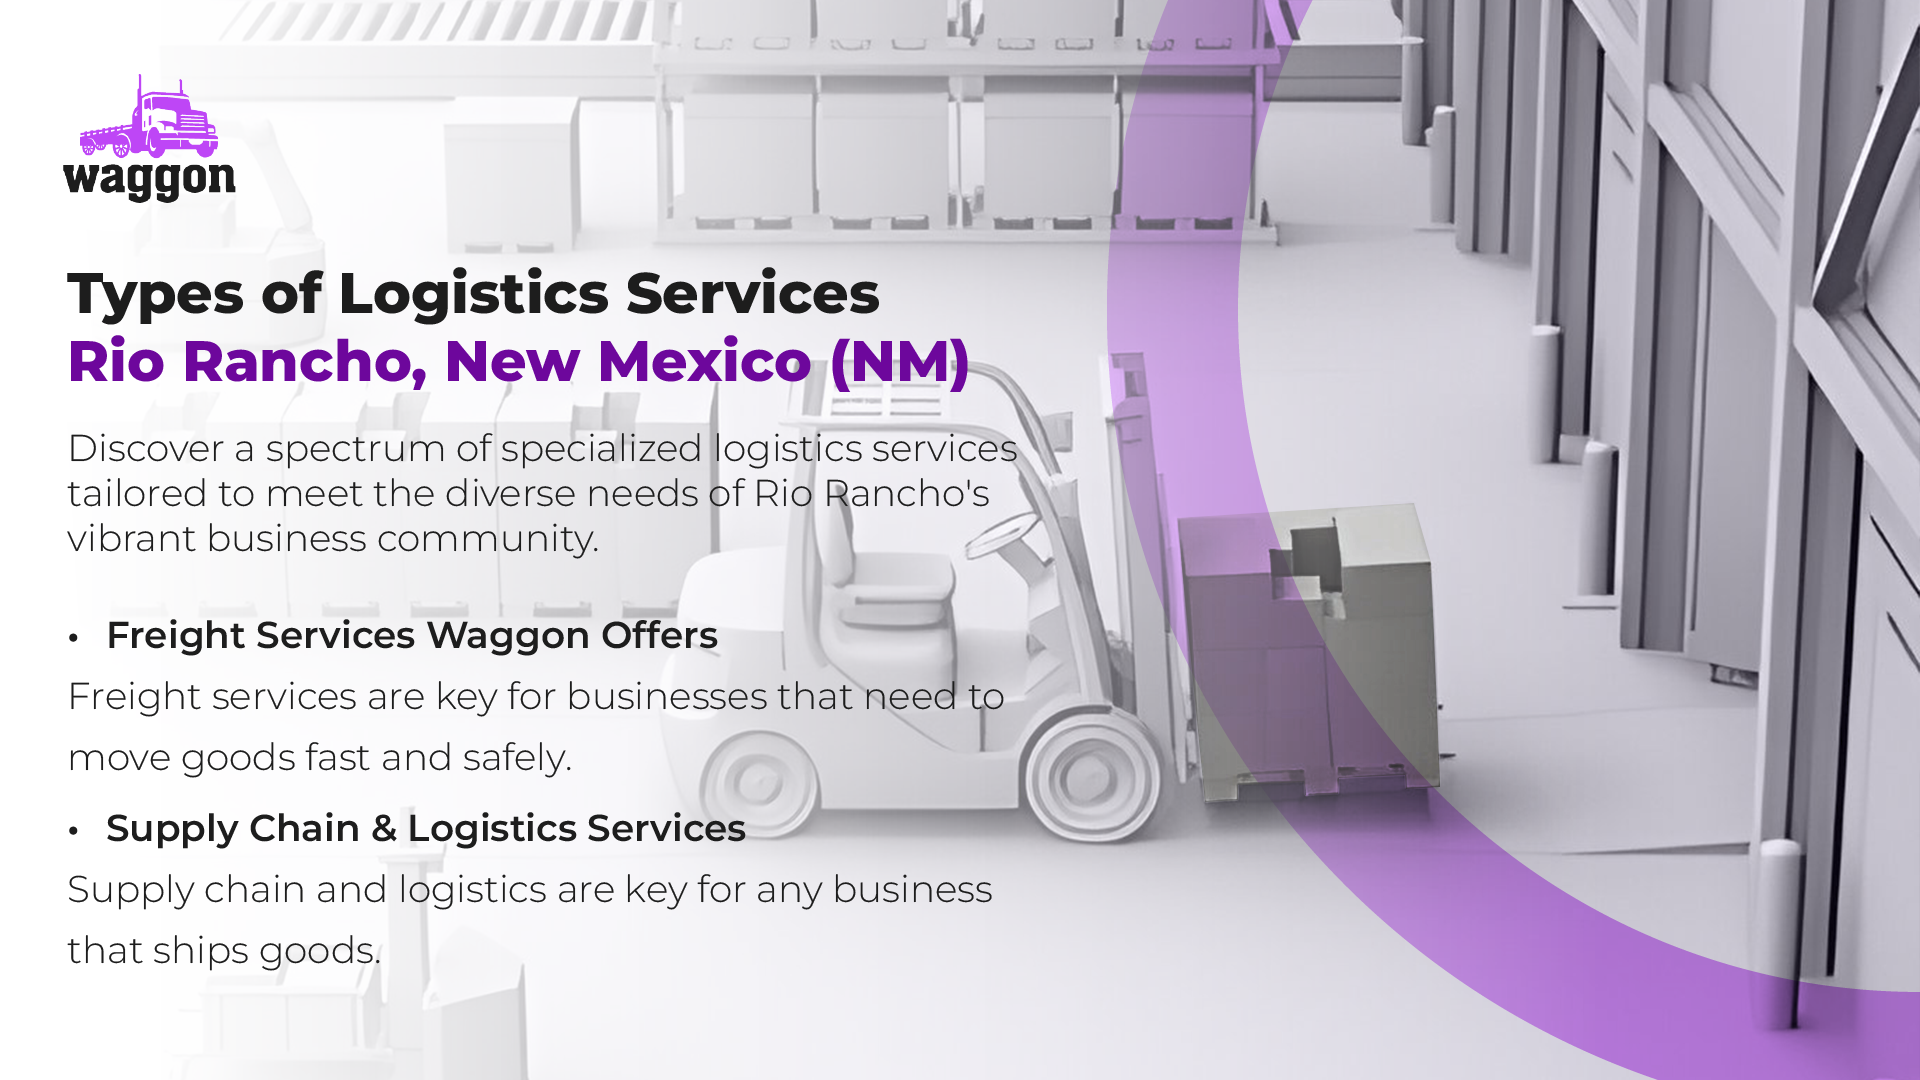 Types of Logistics Services in Rio Rancho, New Mexico (NM)